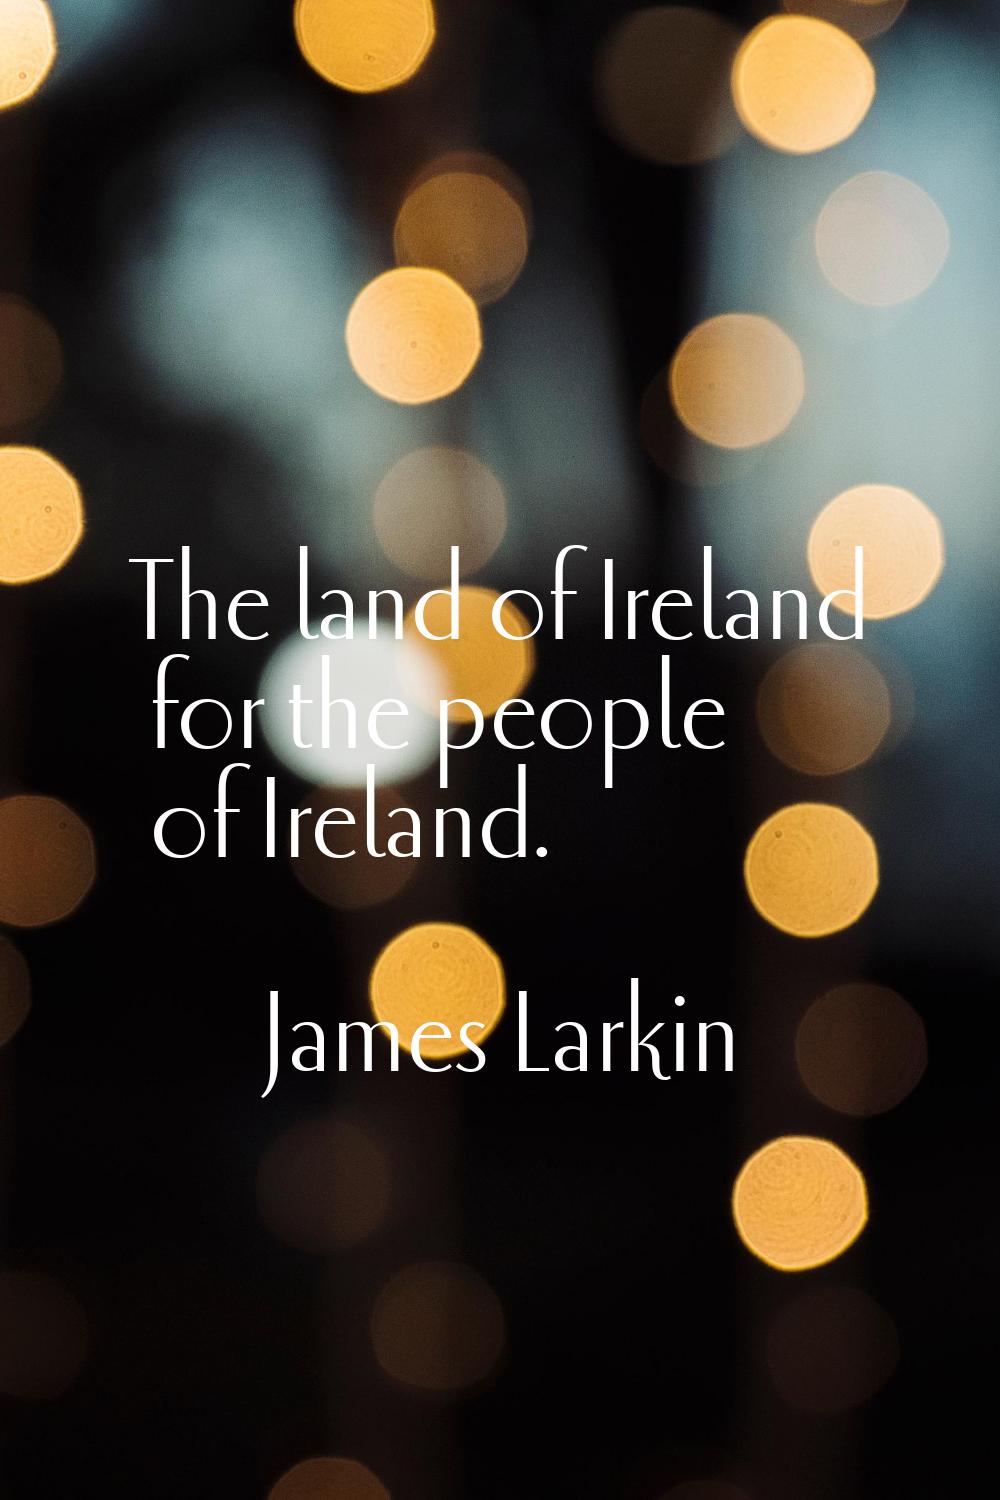 The land of Ireland for the people of Ireland.